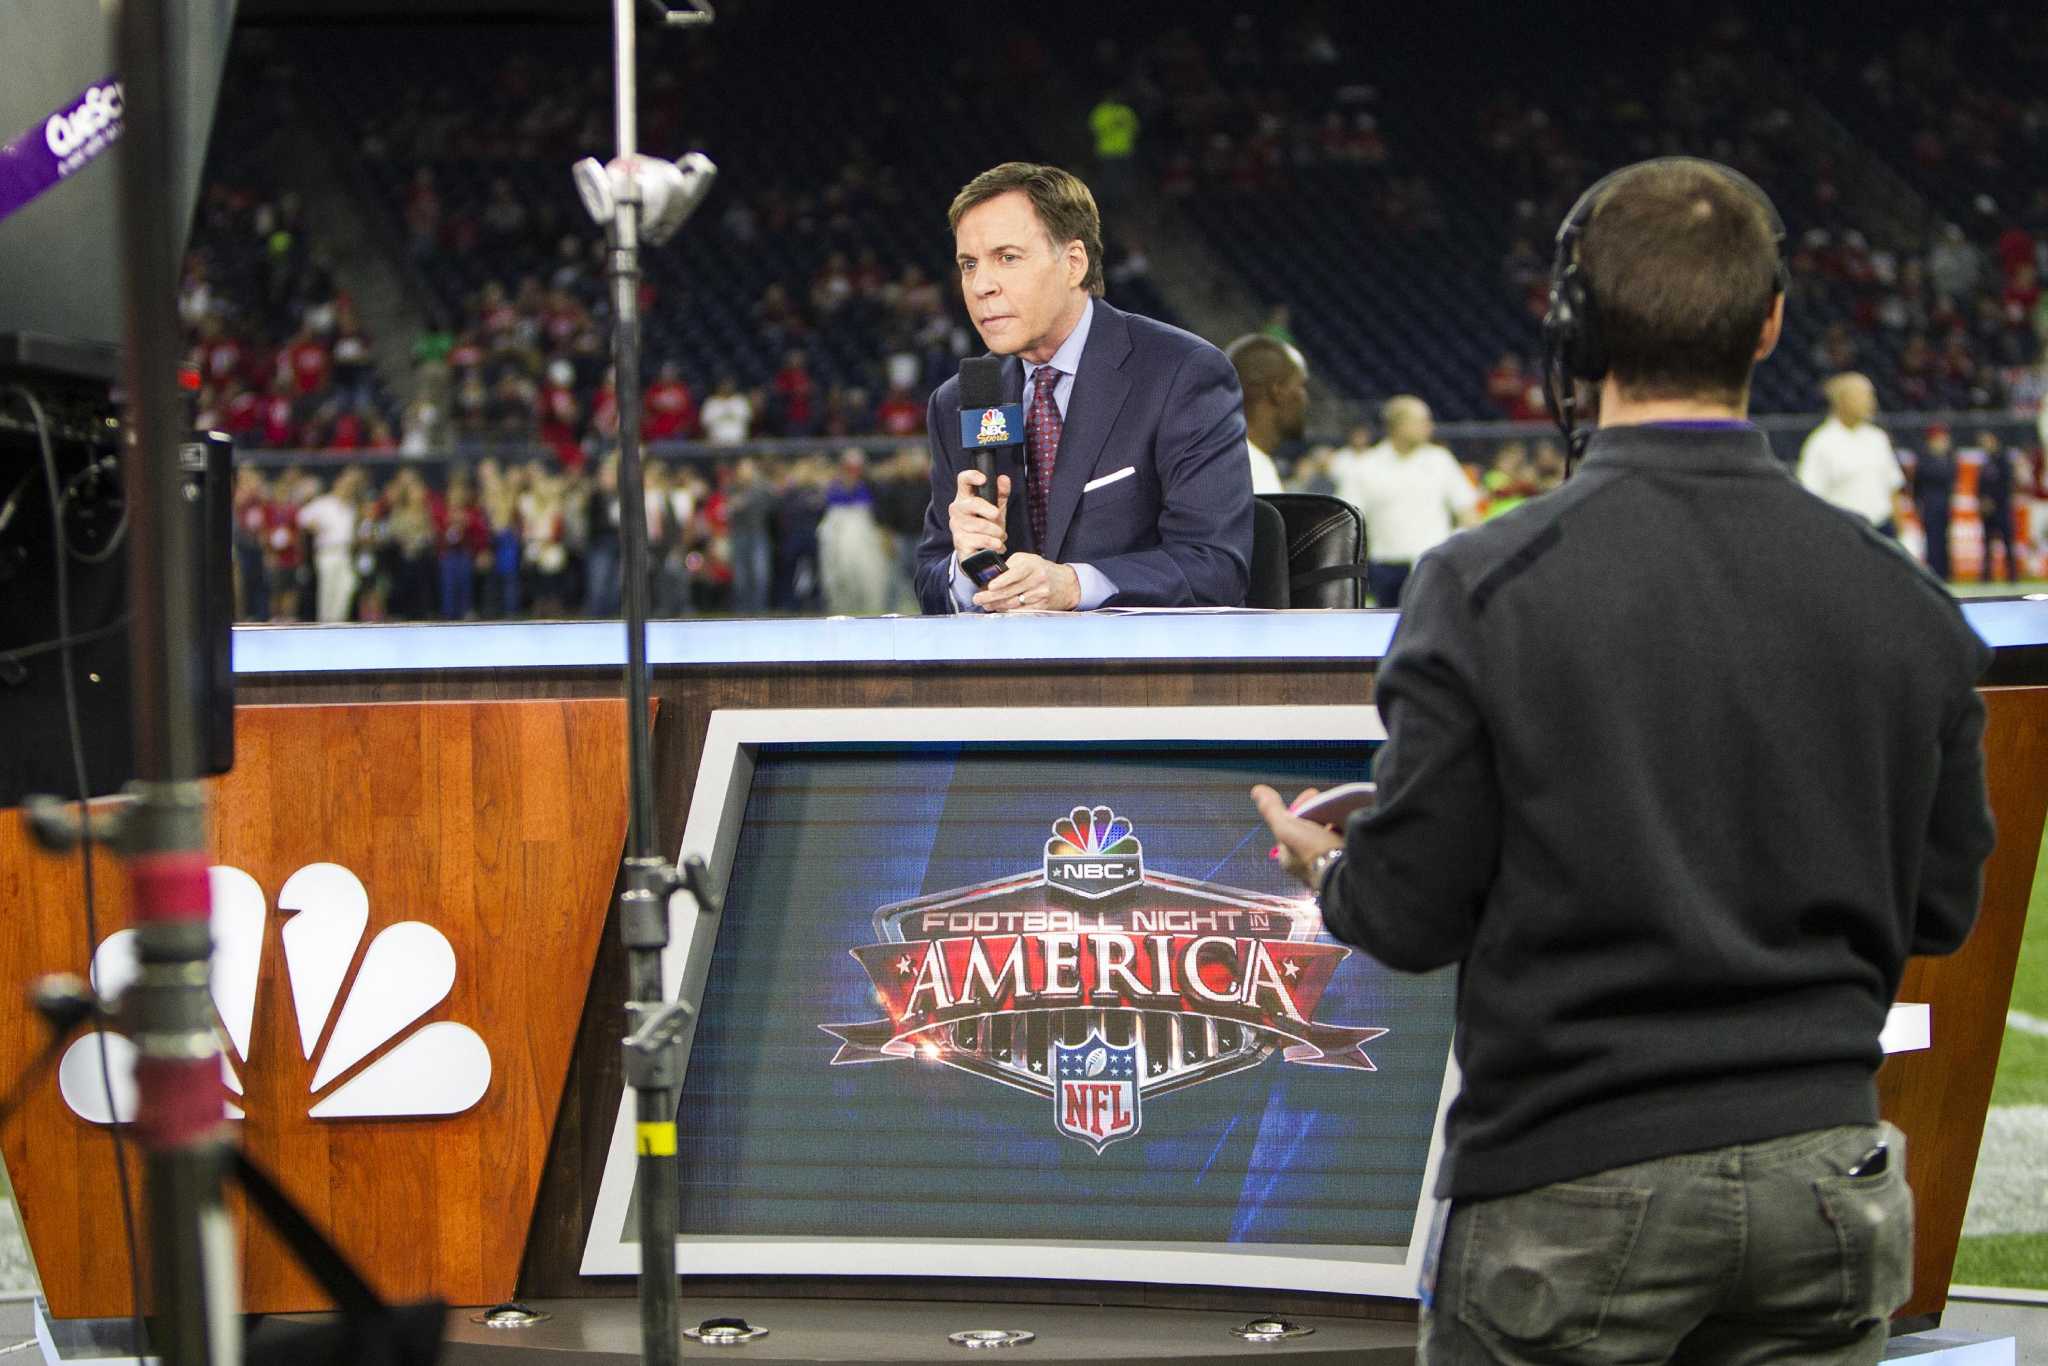 What's wrong with Thursday Night Football? - NBC Sports